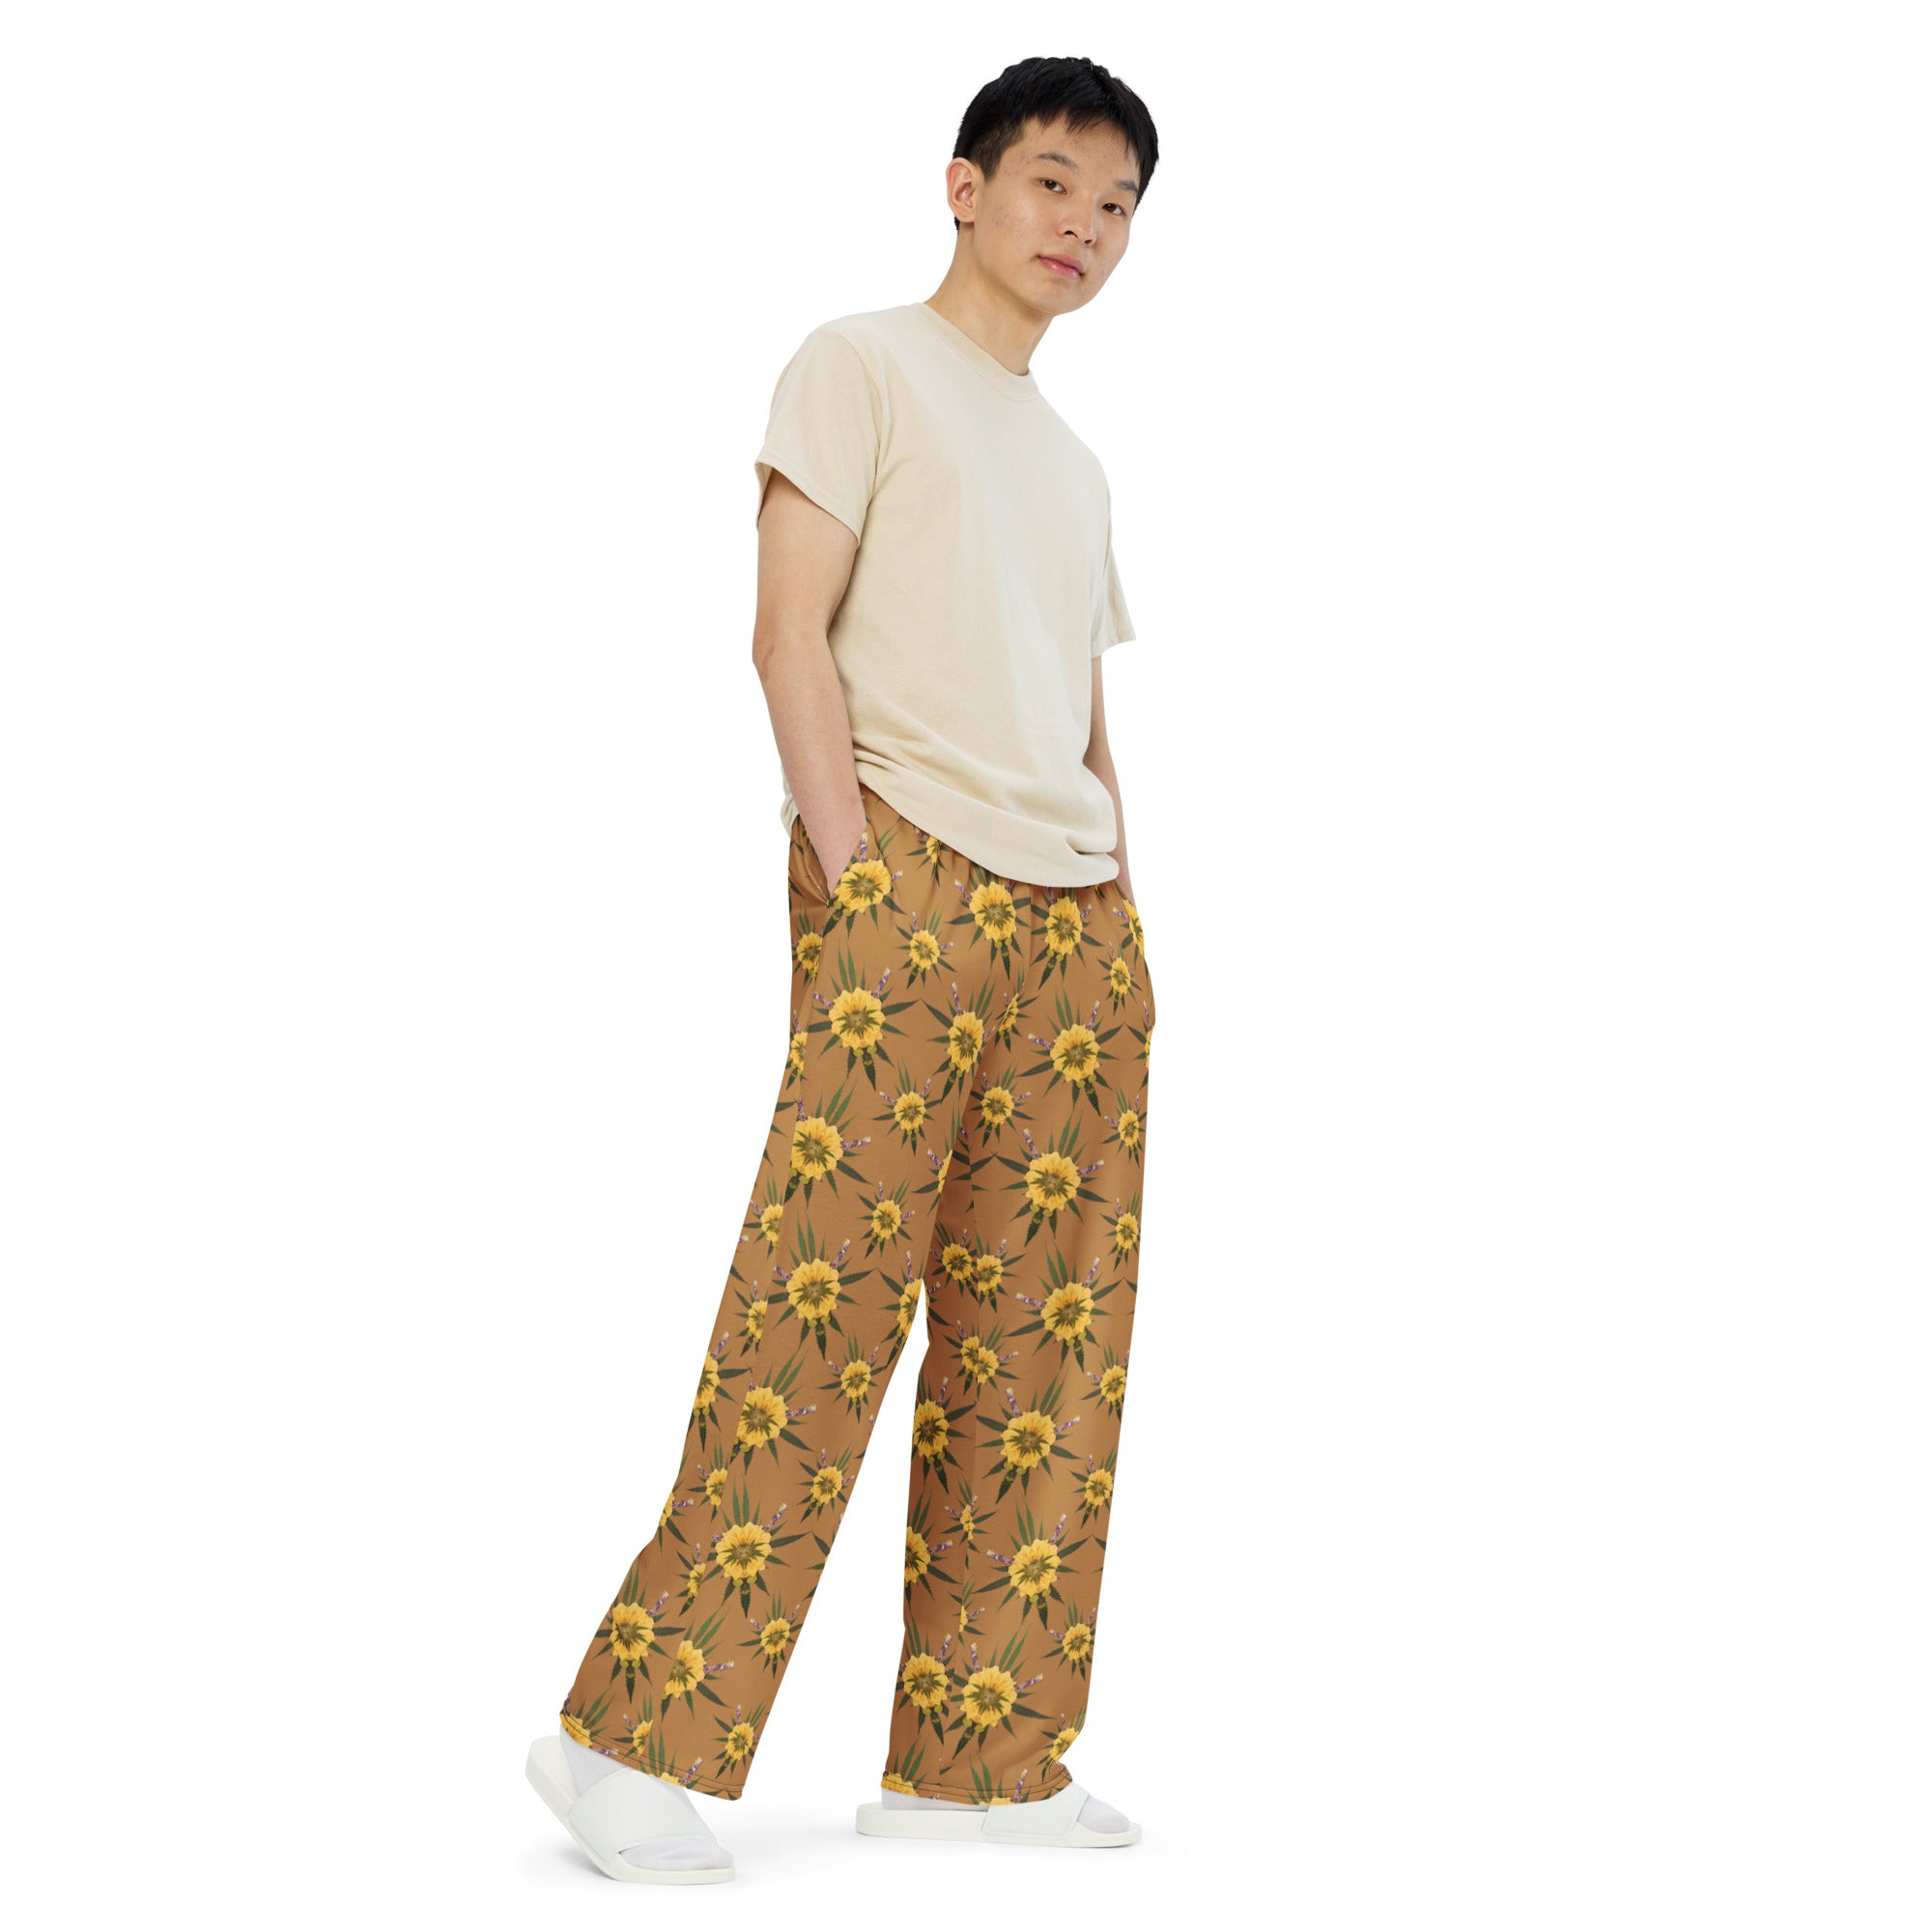 Blossom Playful (Natural) All-over print unisex wide-leg pants